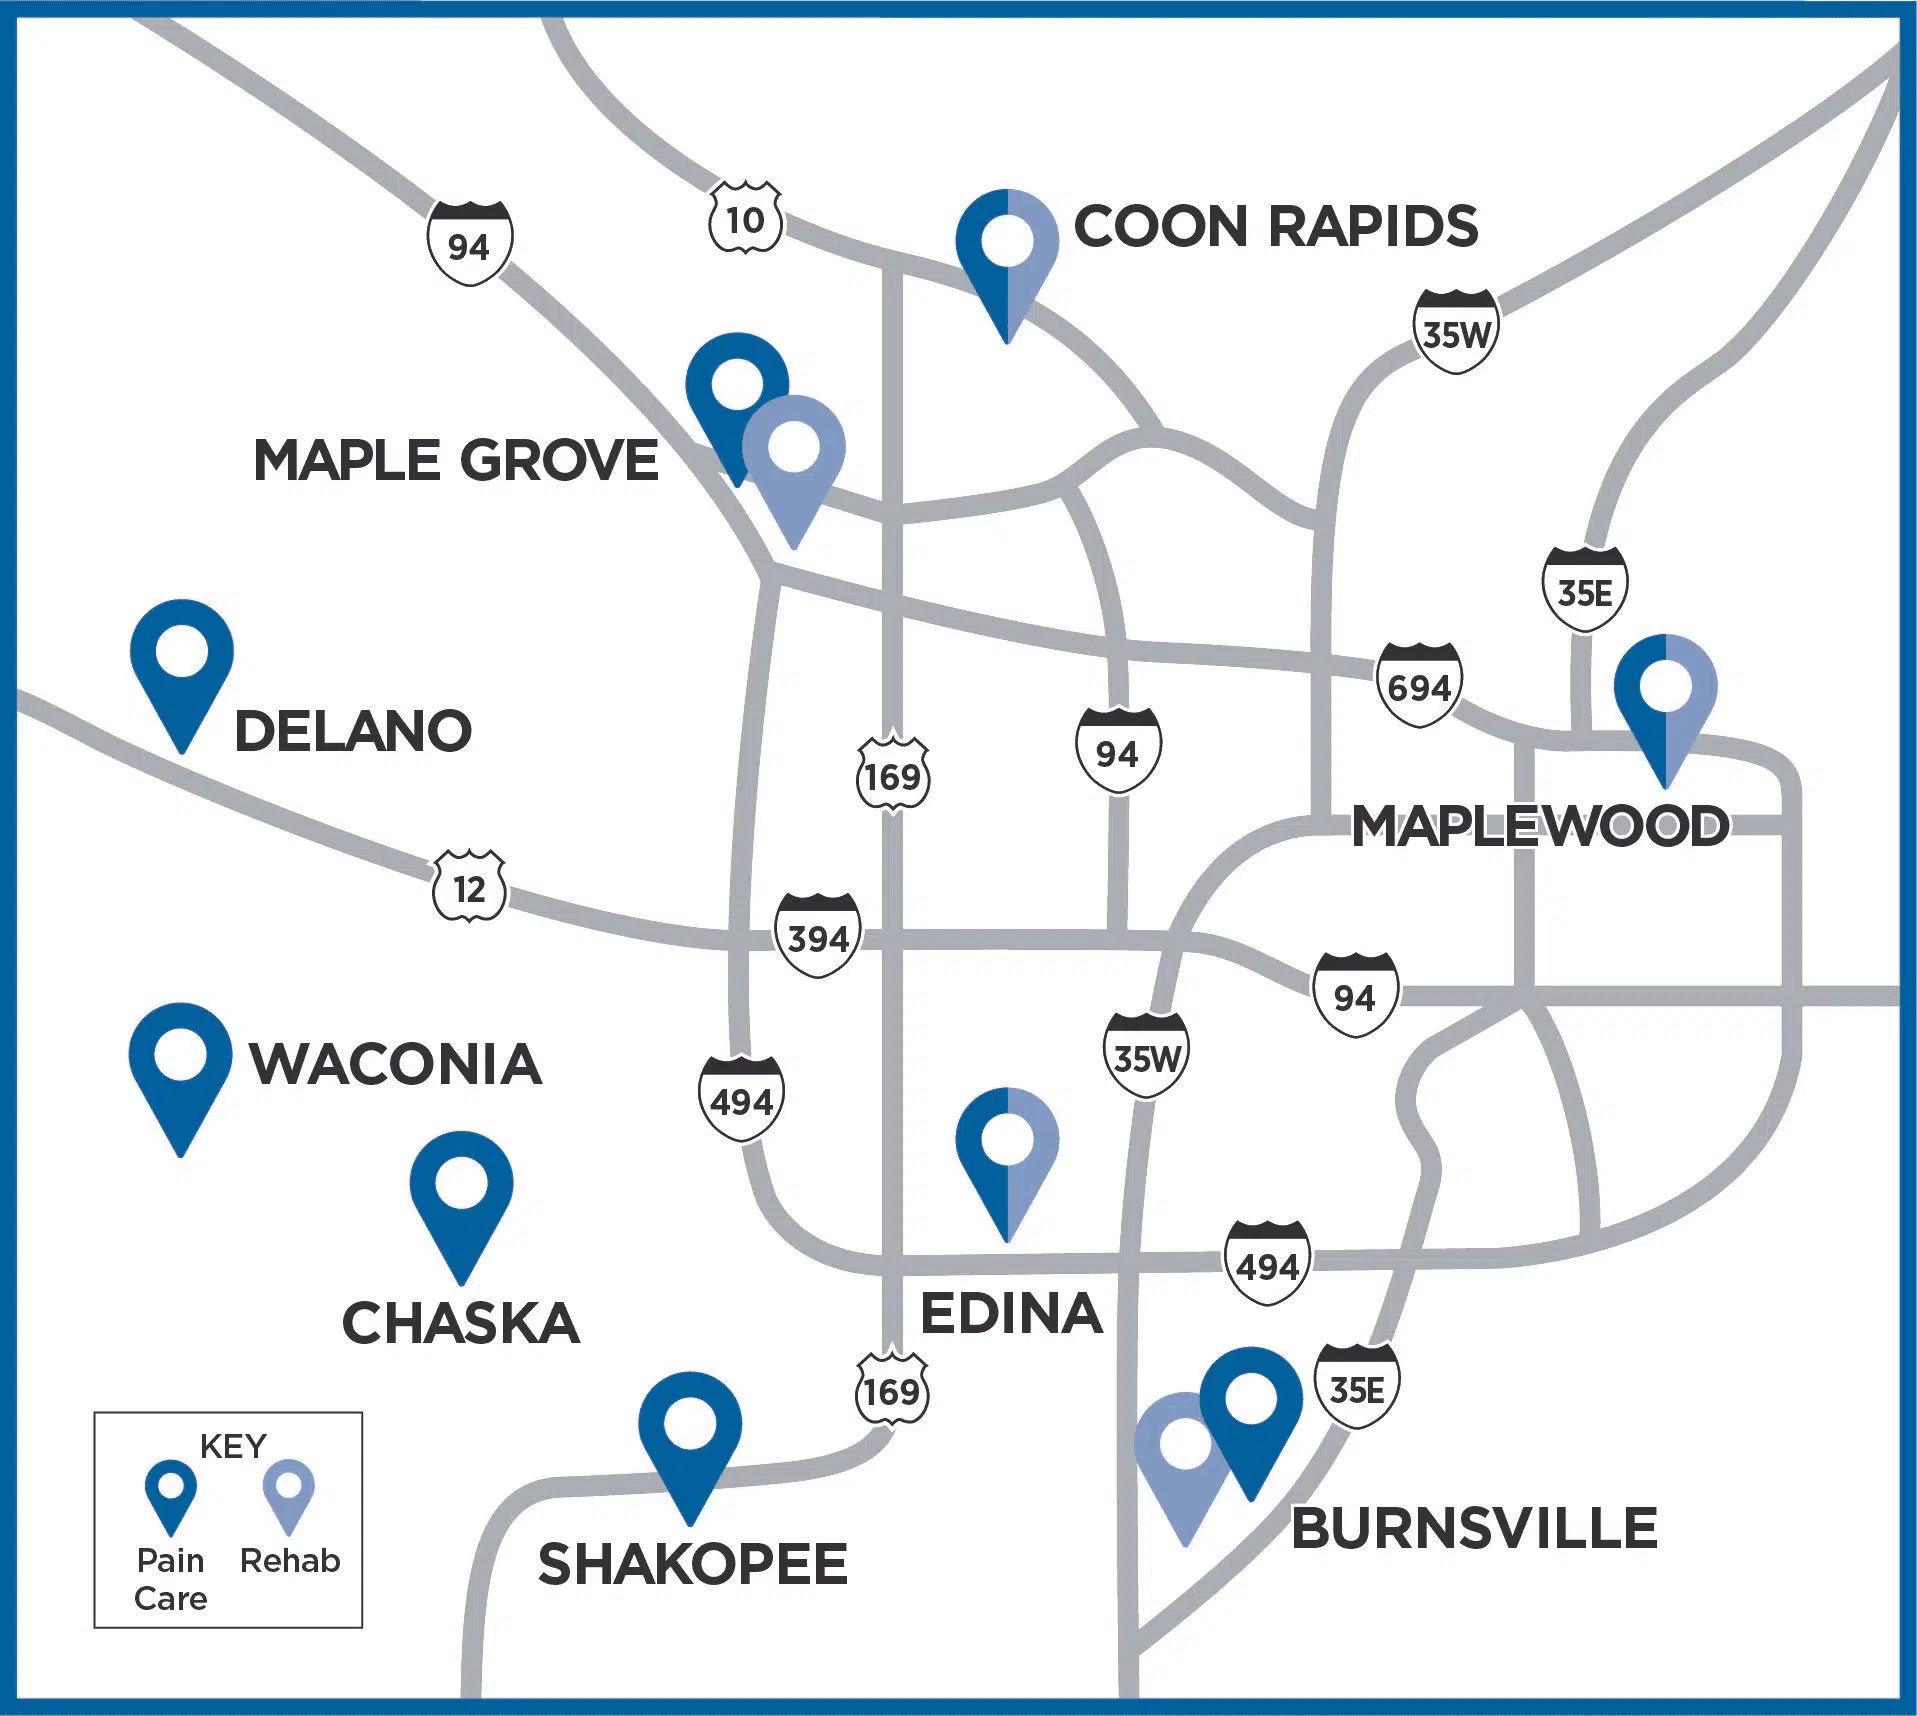 iSpine Clinic locations across the Twin Cities